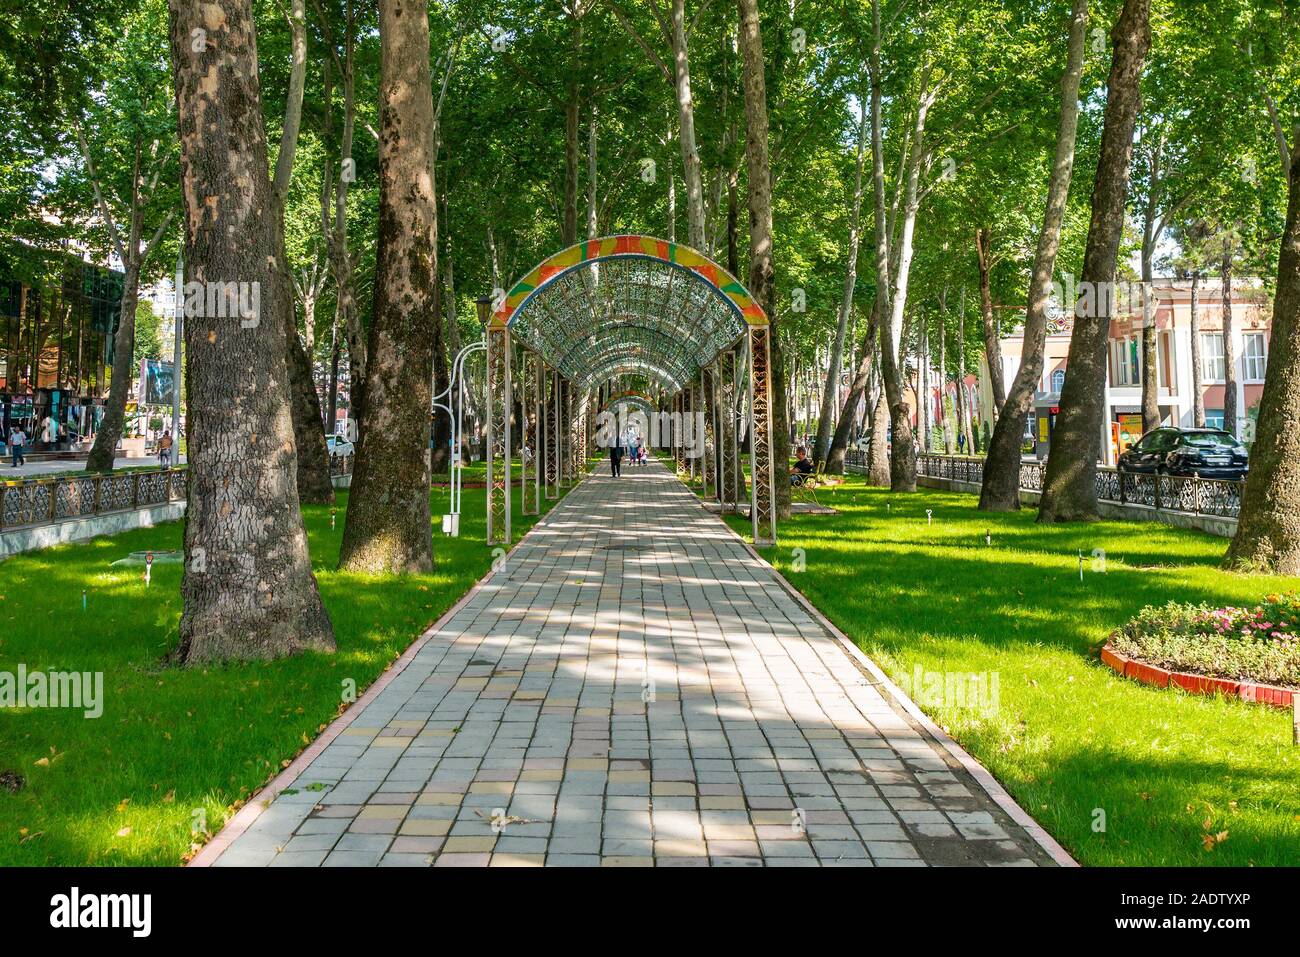 Dushanbe Rudaki Avenue Picturesque Breathtaking View of an Alley Walkway for Pedestrians on a Sunny Blue Sky Day Stock Photo